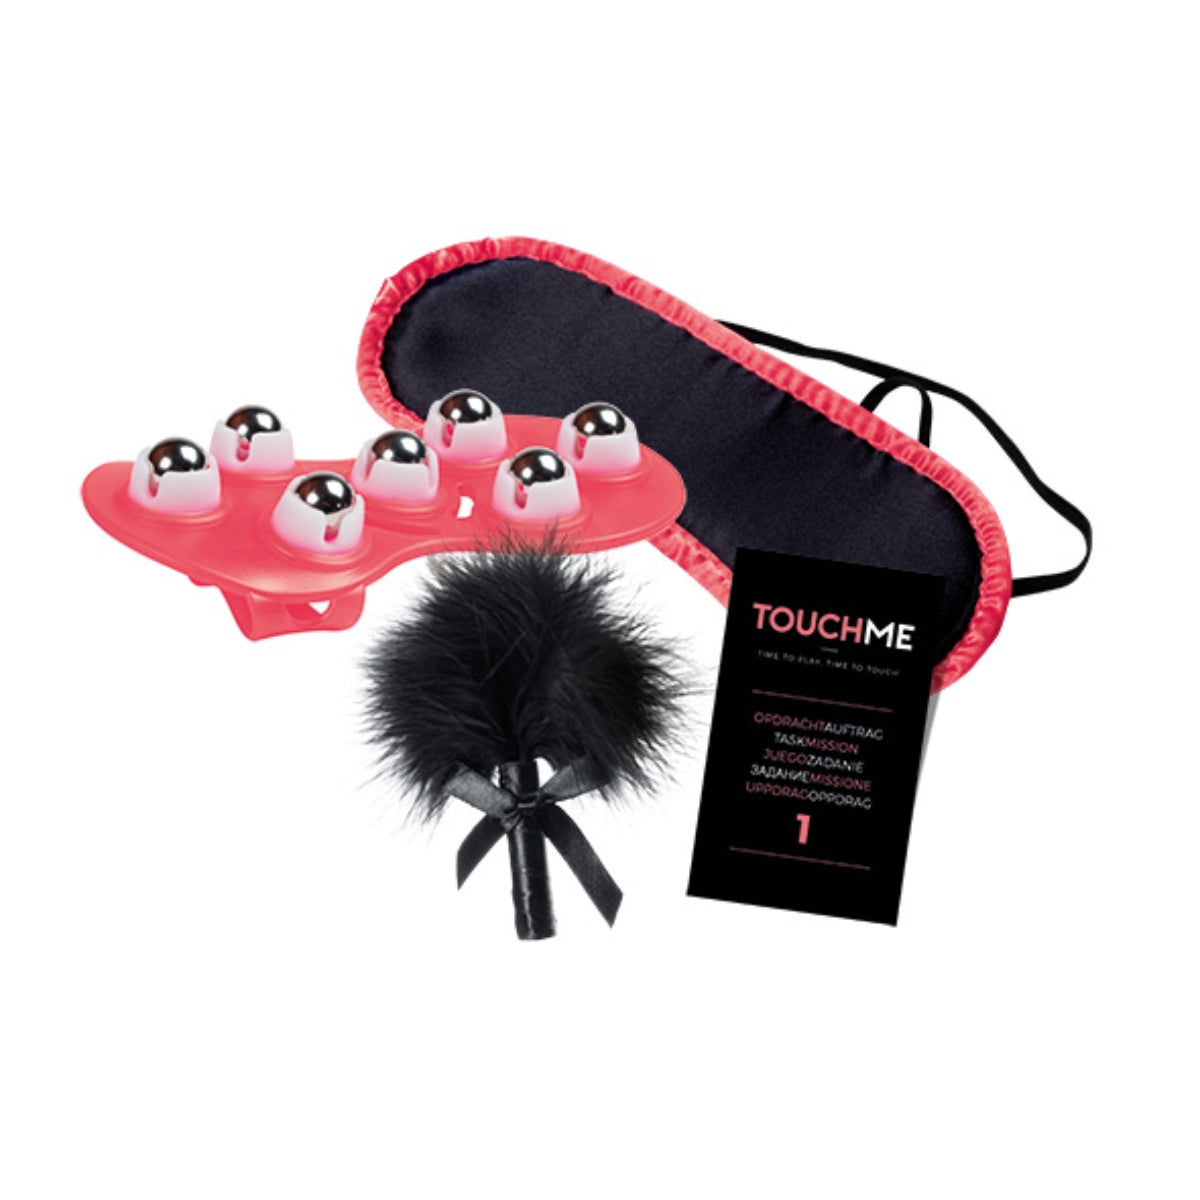 Sex Toy Kits Tease & Please Touch Me Time To Play Time To Touch Set   